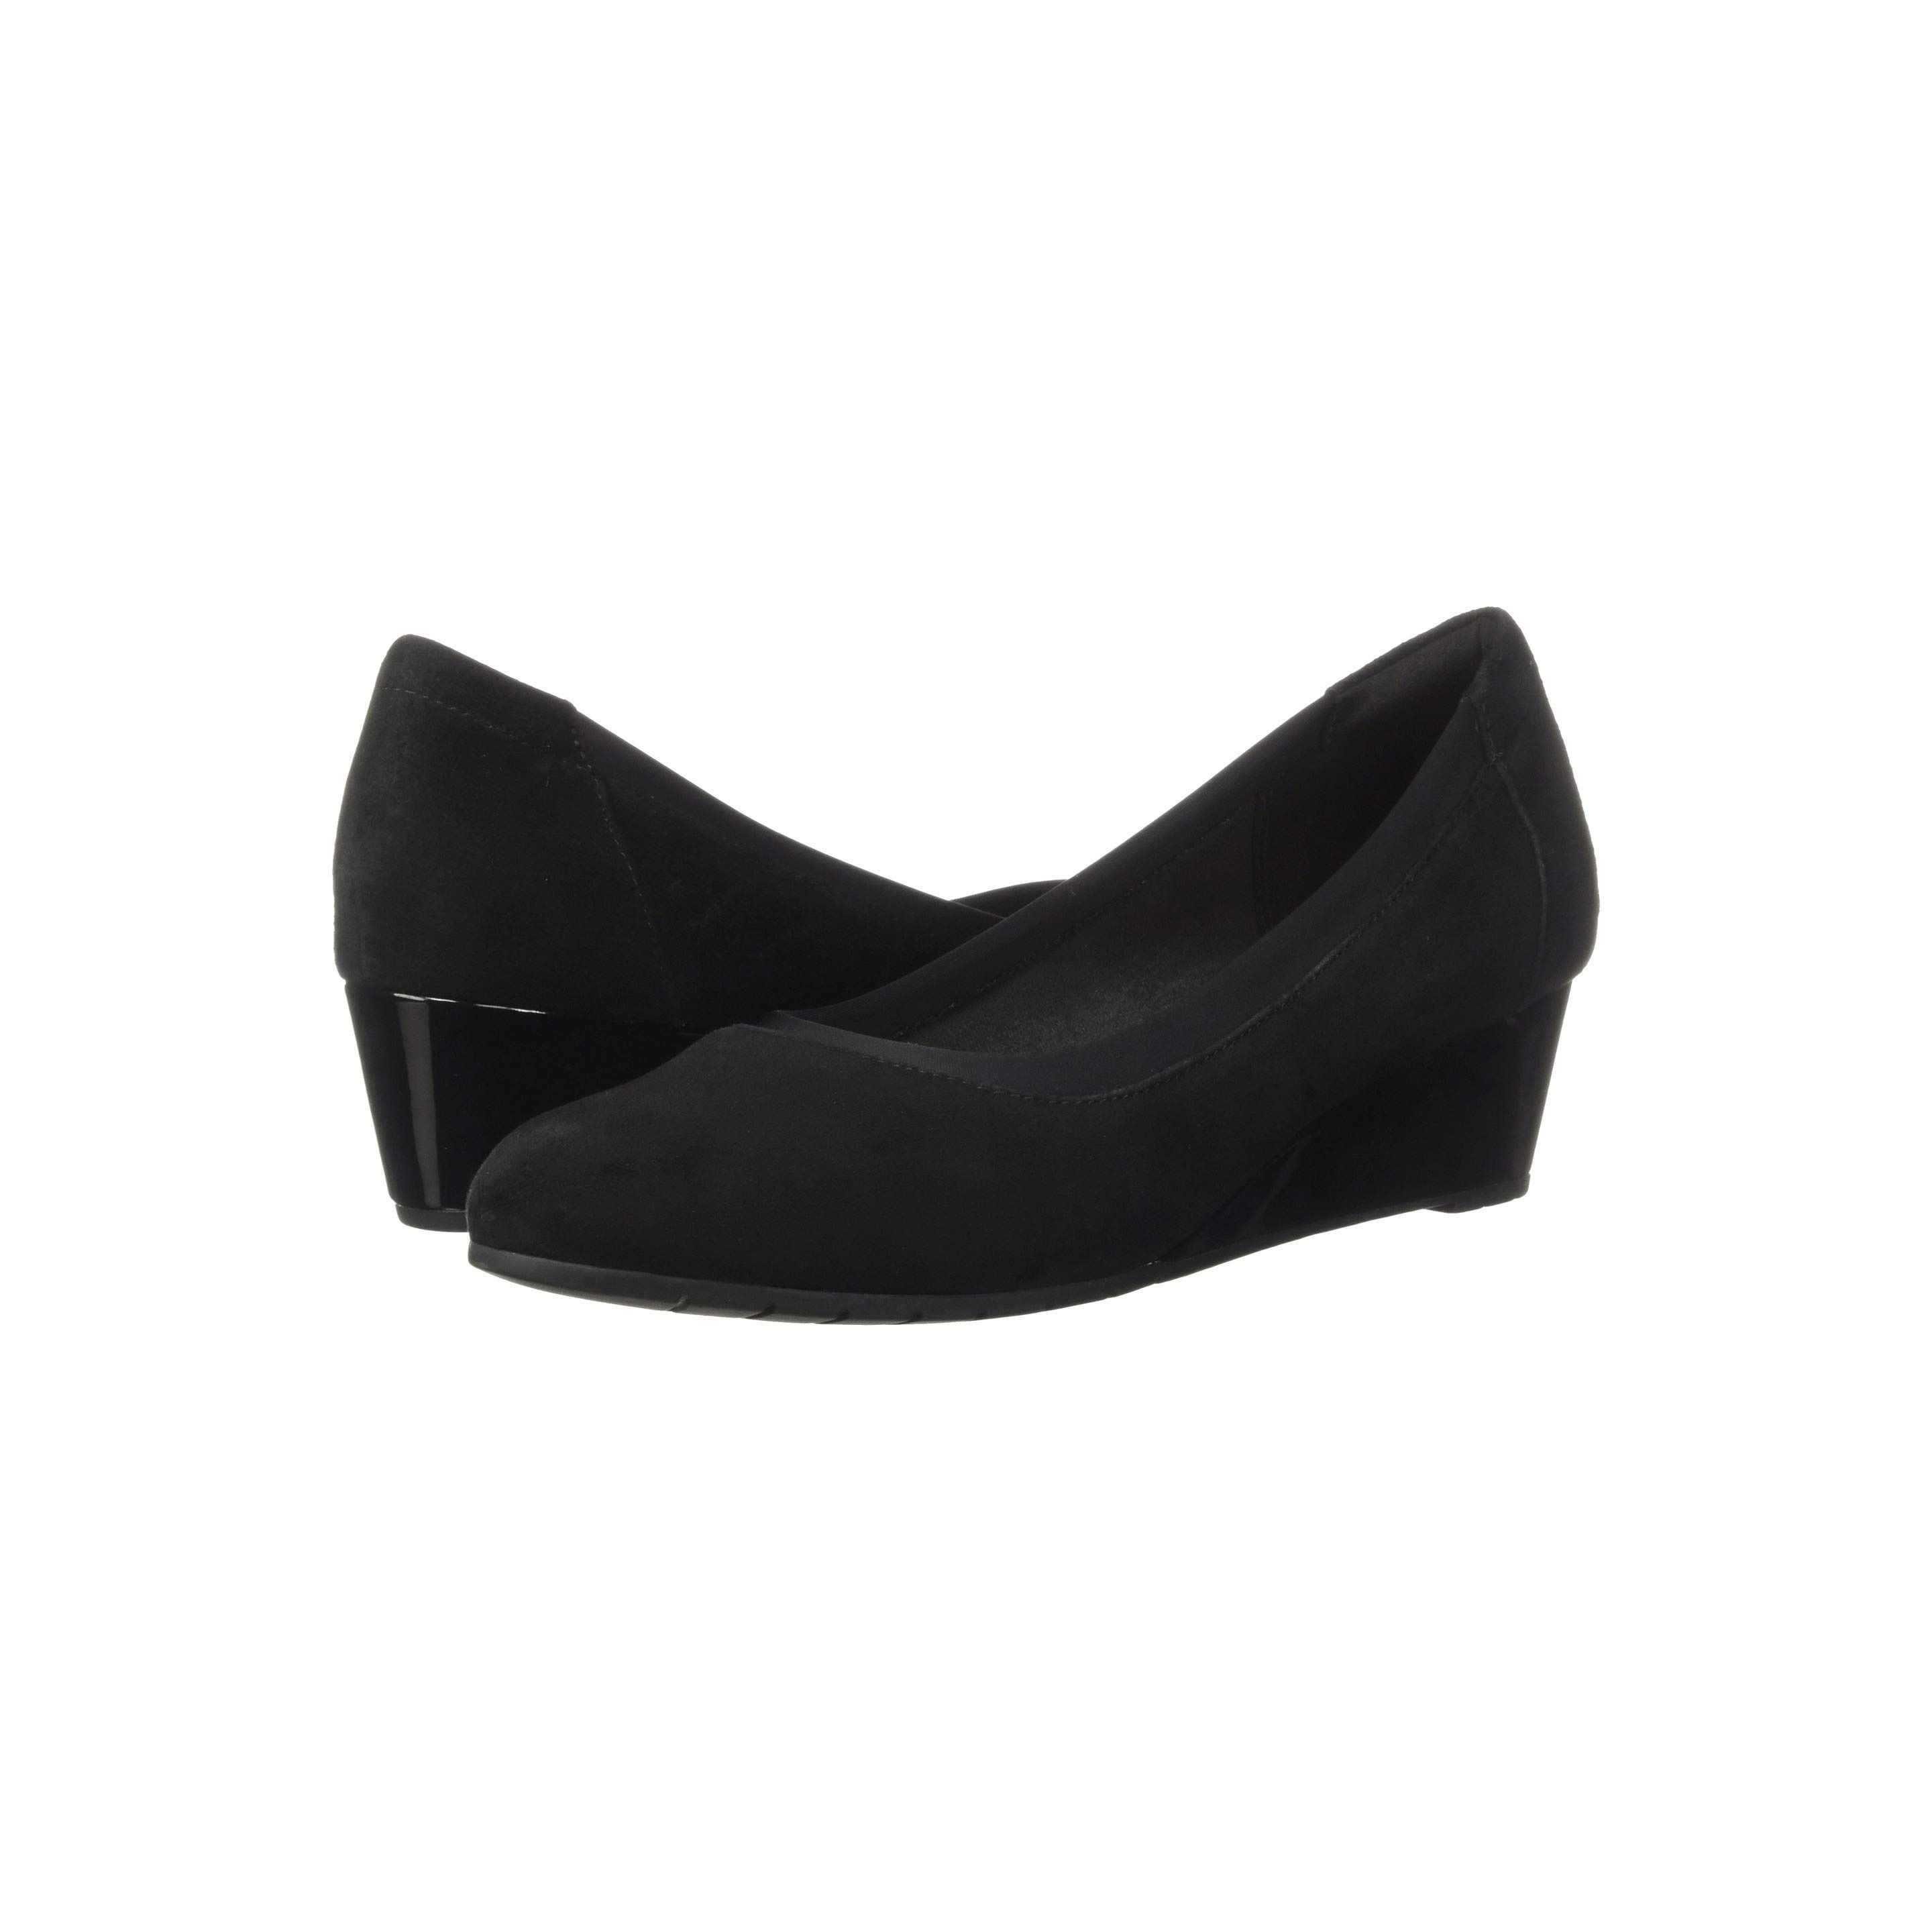 Buy > flat wedges shoes > in stock